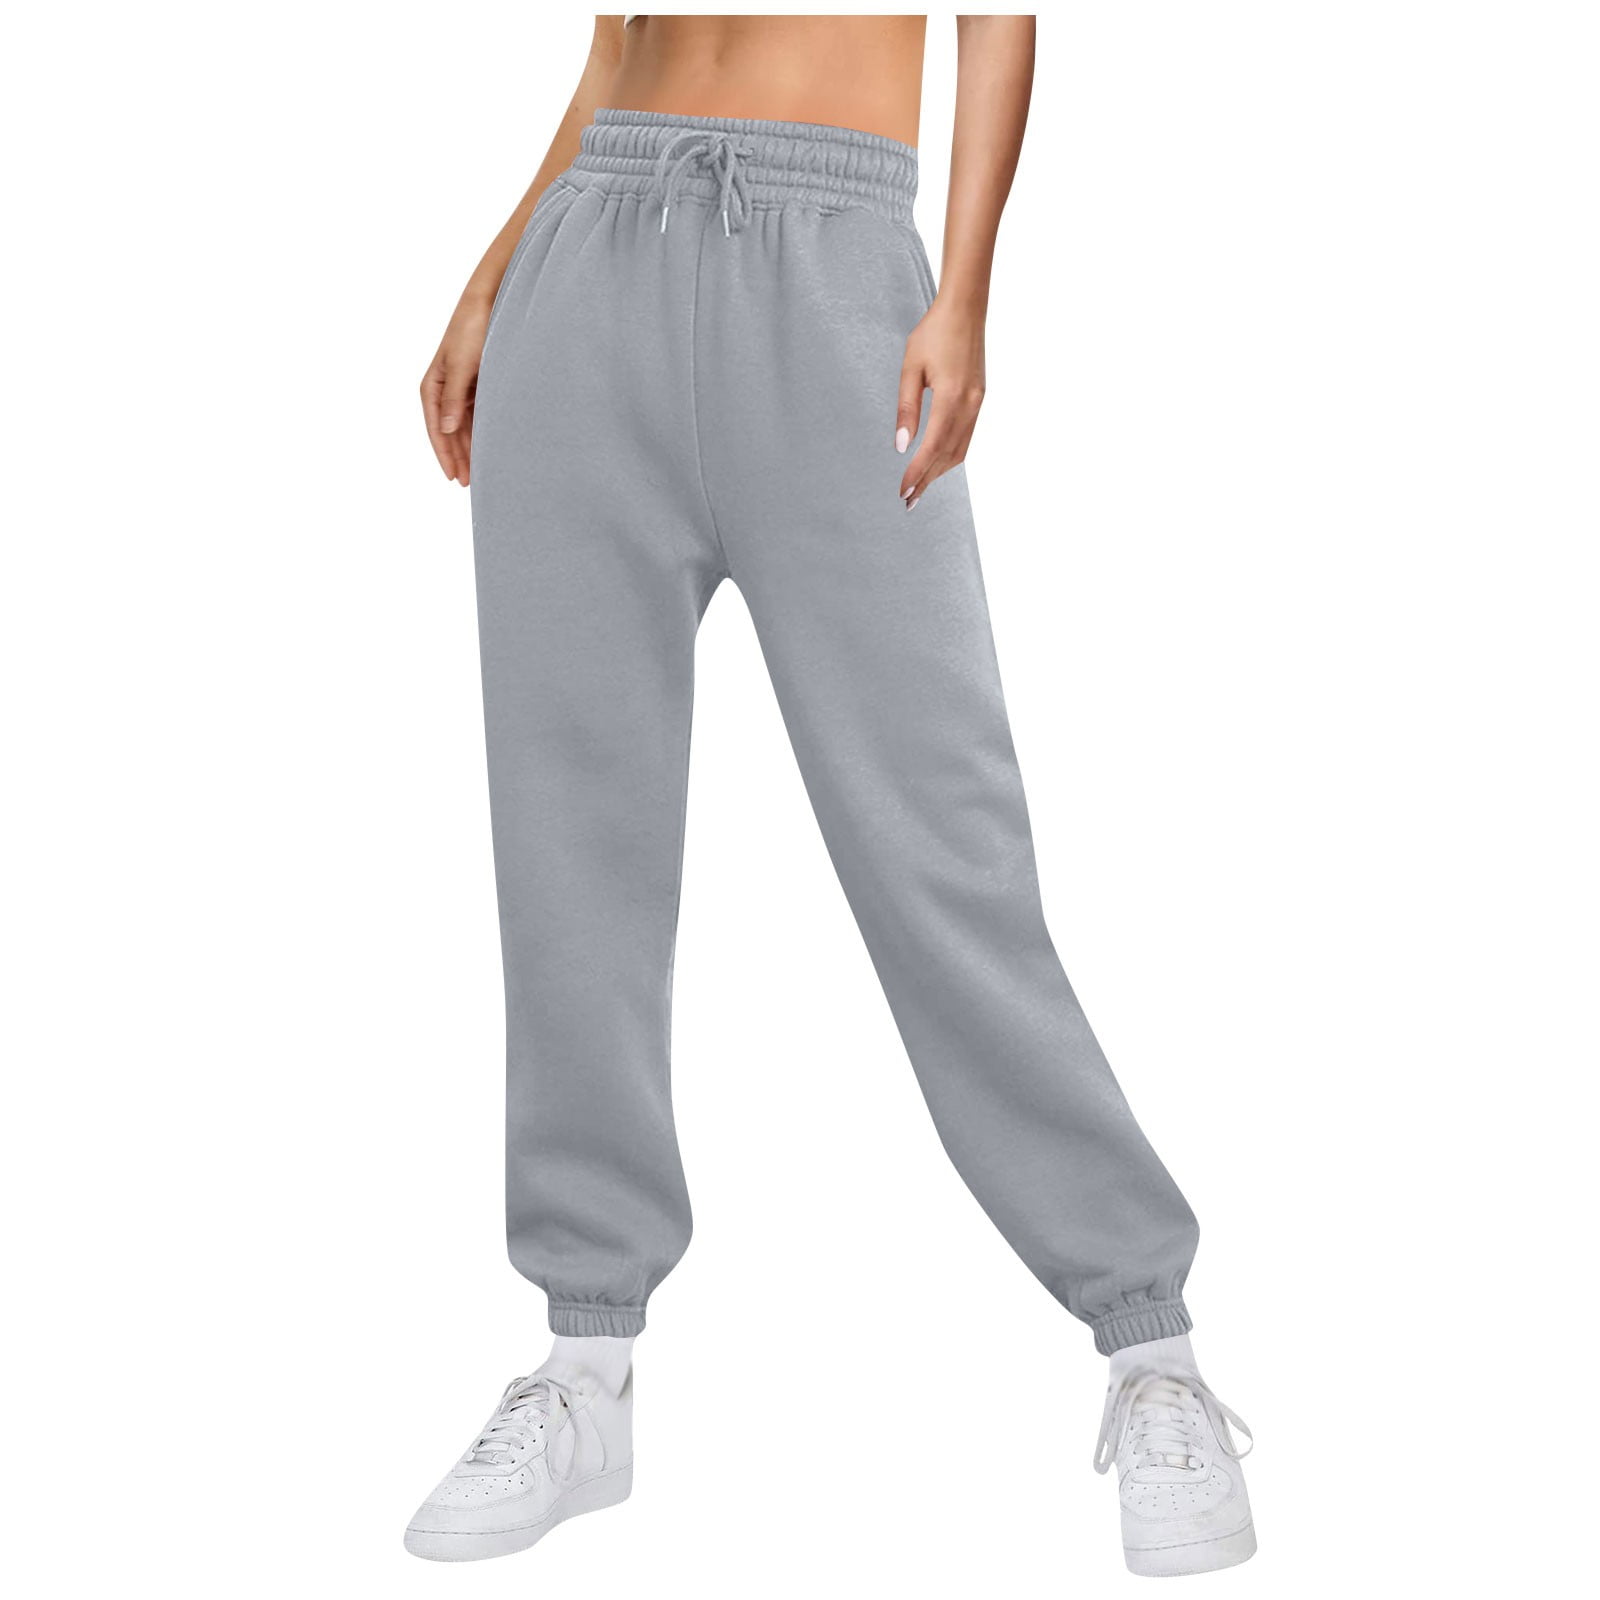  Kafiloe Women Casual Solid Jogger Pants Drawstring Elastic  Waist Stacked Sweatpant with Pocket Gray S : Clothing, Shoes & Jewelry